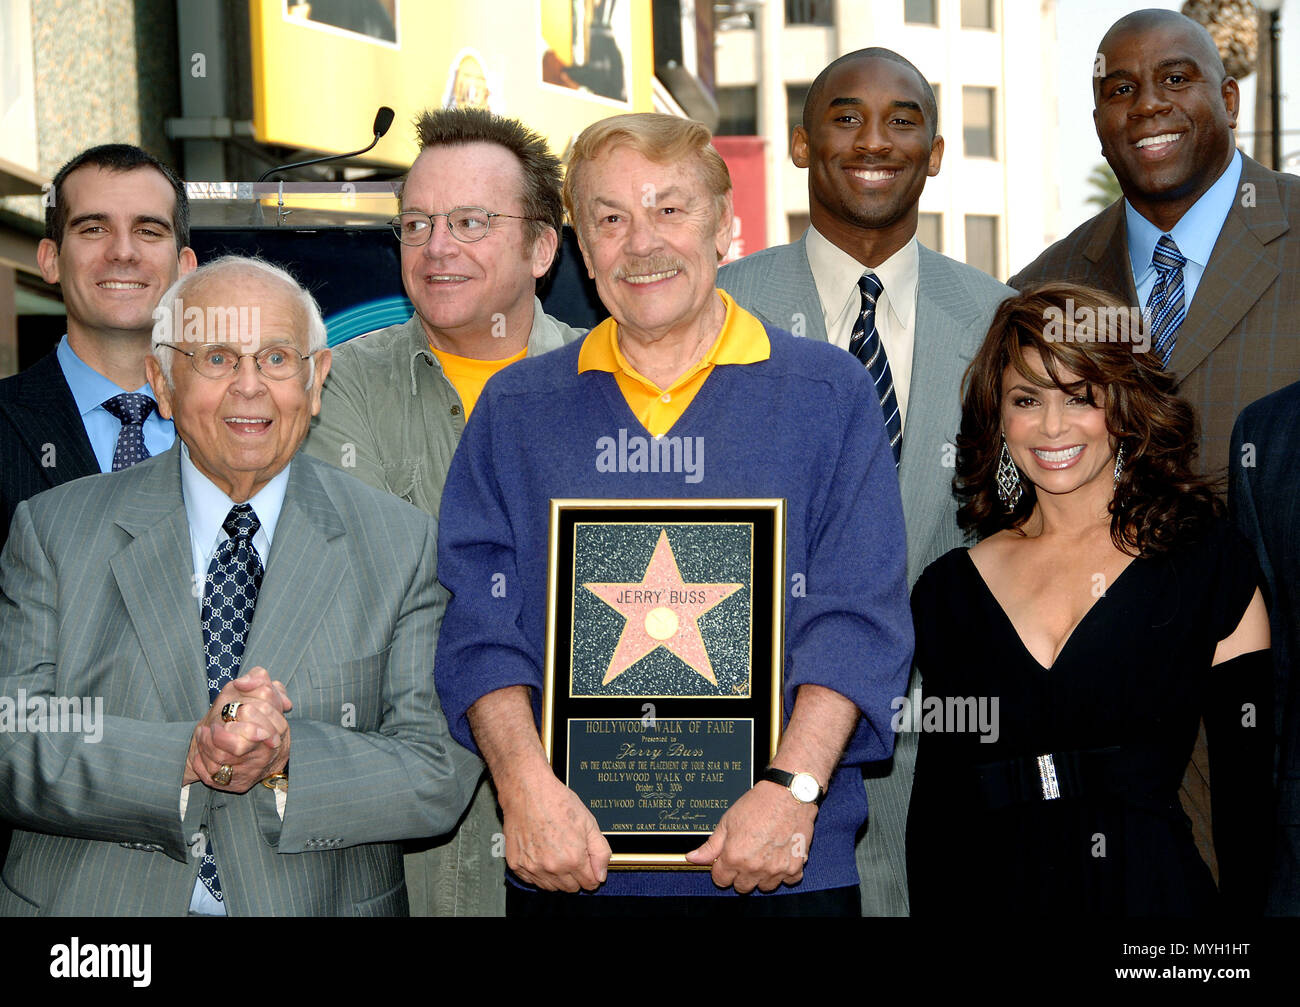 Jerry Buzz ( owner of the LA Laker ) received a star on the Hollywood walk of Fame in Los Angeles.  Jerry Buss, with Tom Arnold, Kobe Bryant, Magic Johnson, Paula Abdul and Hollywood mayor Johnny Grant          -            30_BussJerry+star.jpg30_BussJerry+star  Event in Hollywood Life - California, Red Carpet Event, USA, Film Industry, Celebrities, Photography, Bestof, Arts Culture and Entertainment, Topix Celebrities fashion, Best of, Hollywood Life, Event in Hollywood Life - California, movie celebrities, TV celebrities, Music celebrities, Topix, Bestof, Arts Culture and Entertainment, Pho Stock Photo